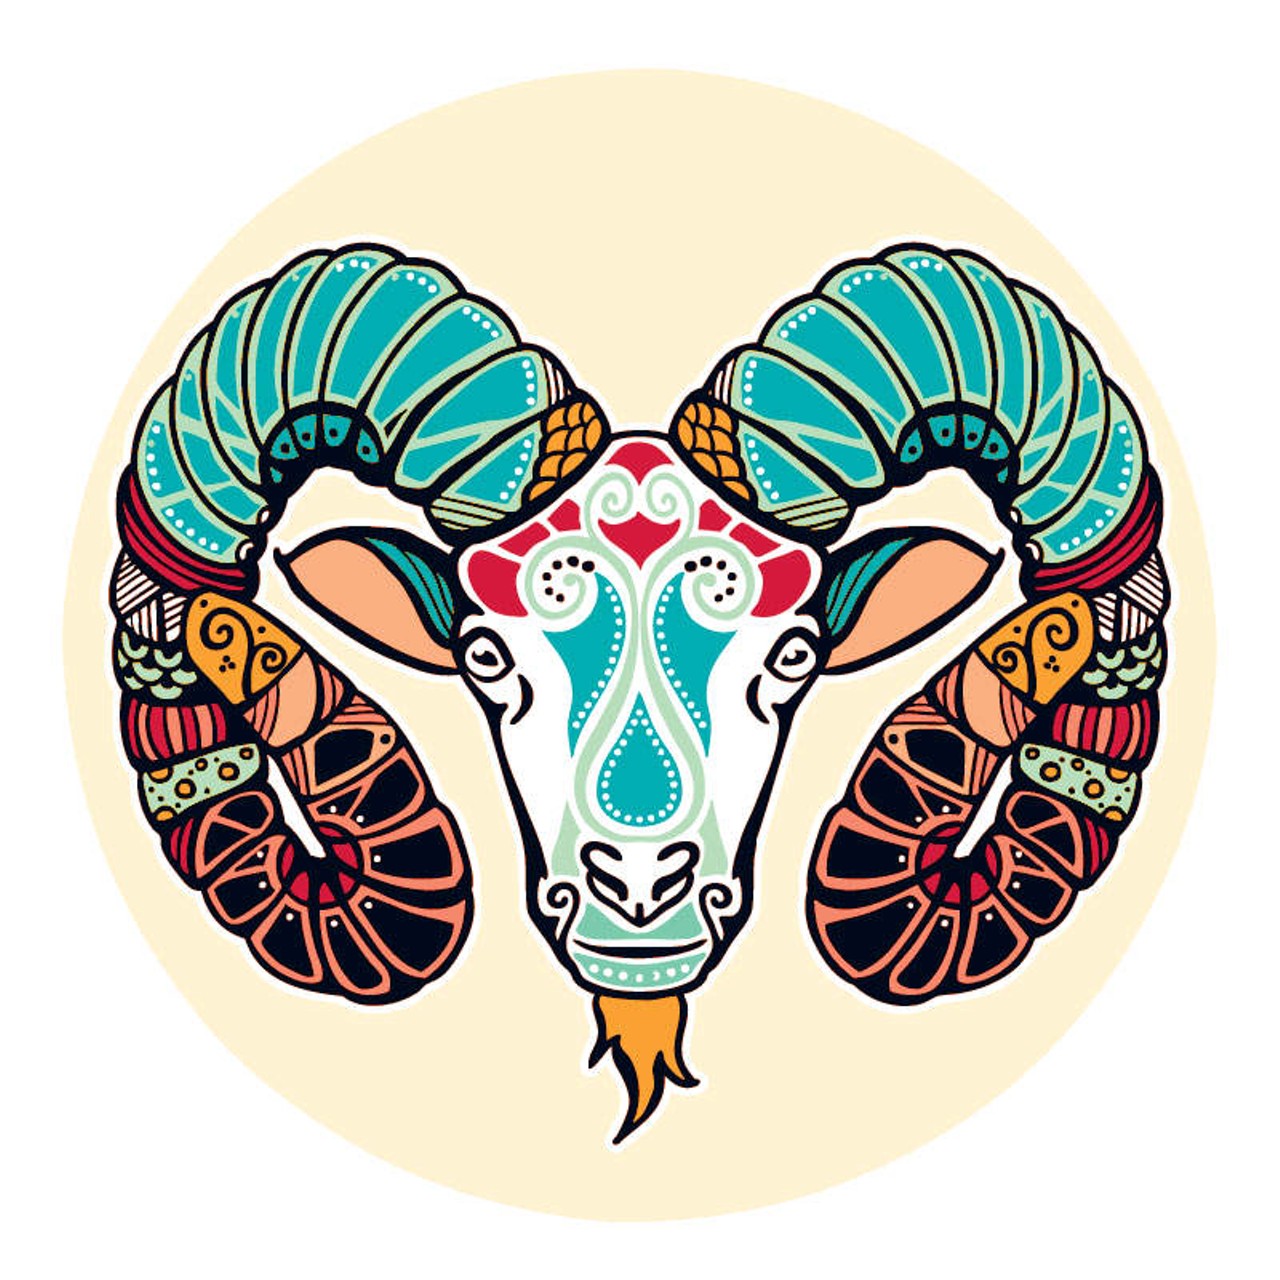 ARIES (March 21- April 20): 
You&#146;ve got the world on a string. If this is hard to believe it&#146;s because someone forgot to tell you that it&#146;s OK to be, and do, and have, anything you want. For once, your past isn&#146;t about to reflect on your future. Things are either coming together in a big way, or you&#146;re hoping and praying that they will. The idea that everything is at stake makes you wonder if you&#146;re big, or clear, or pure enough to hold space for it all. No one can do this but you, so what&#146;s it going to be? When it&#146;s all or nothing there is only one choice; don&#146;t diminish yourself by thinking that you can&#146;t handle this.